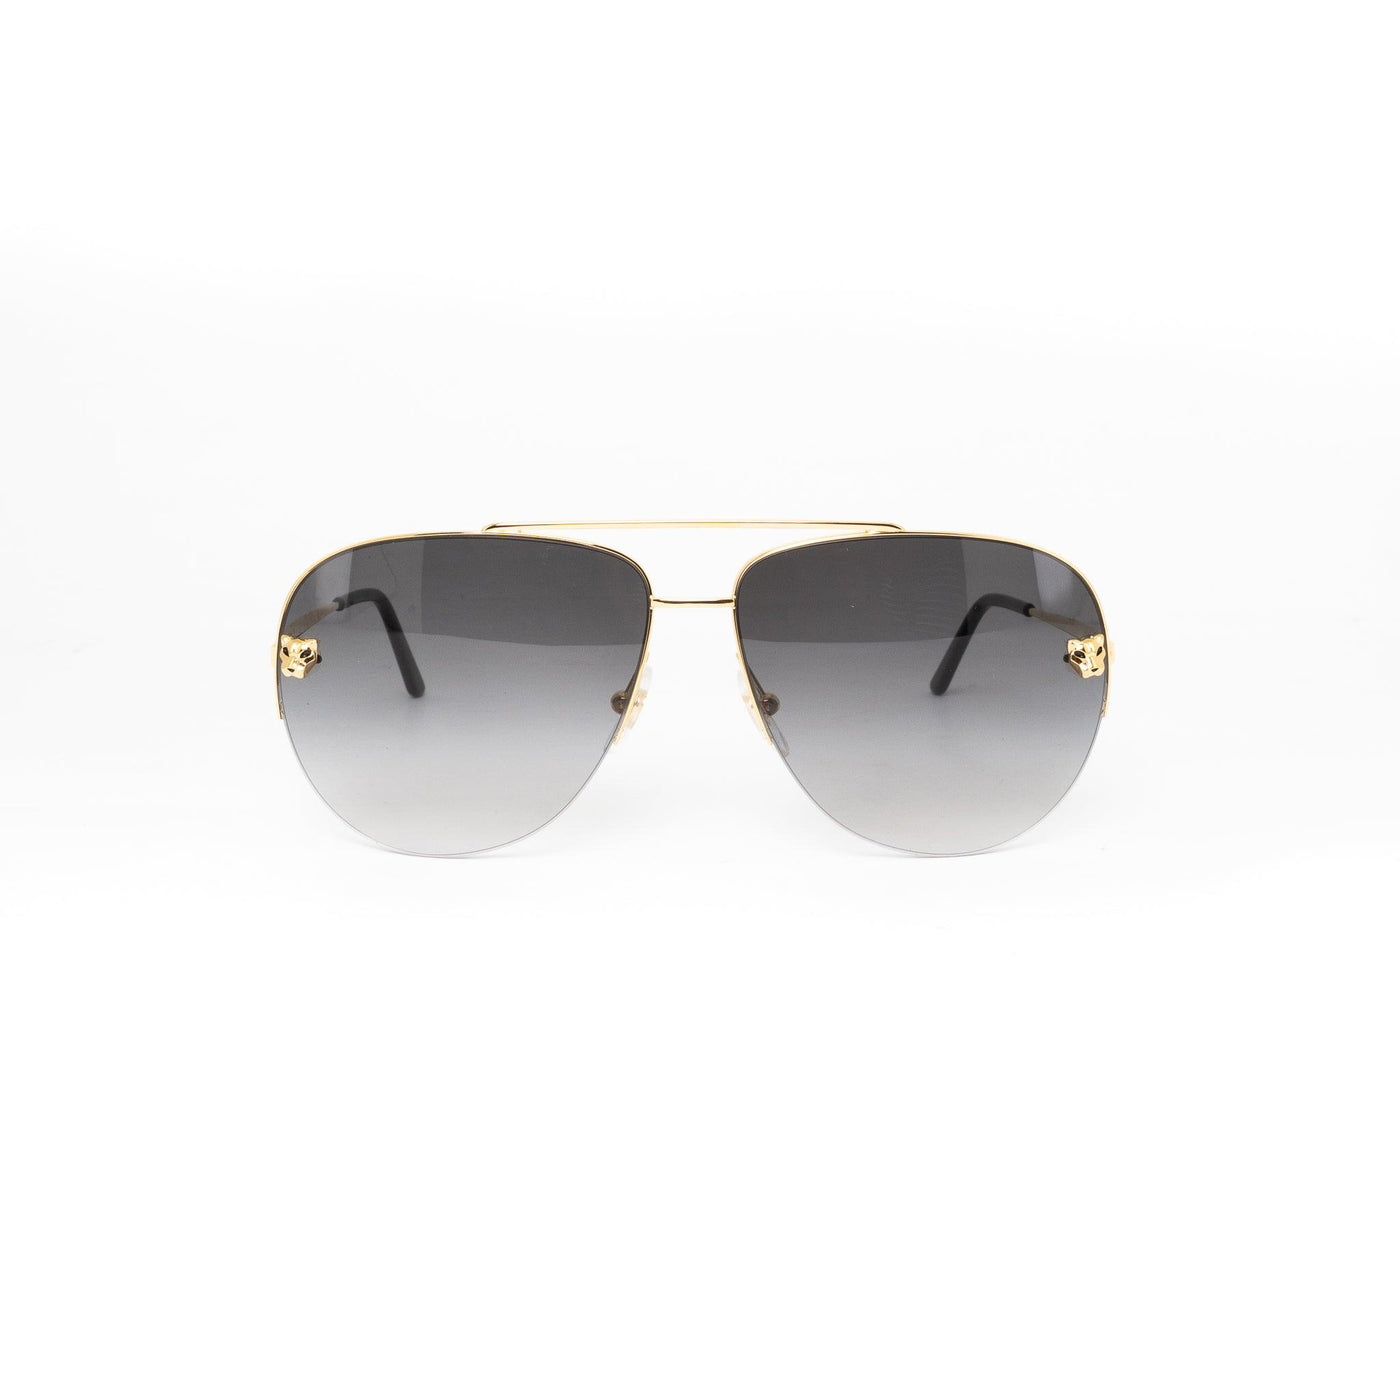 Cartier CT0065S/001 | Sunglasses - Vision Express Optical Philippines